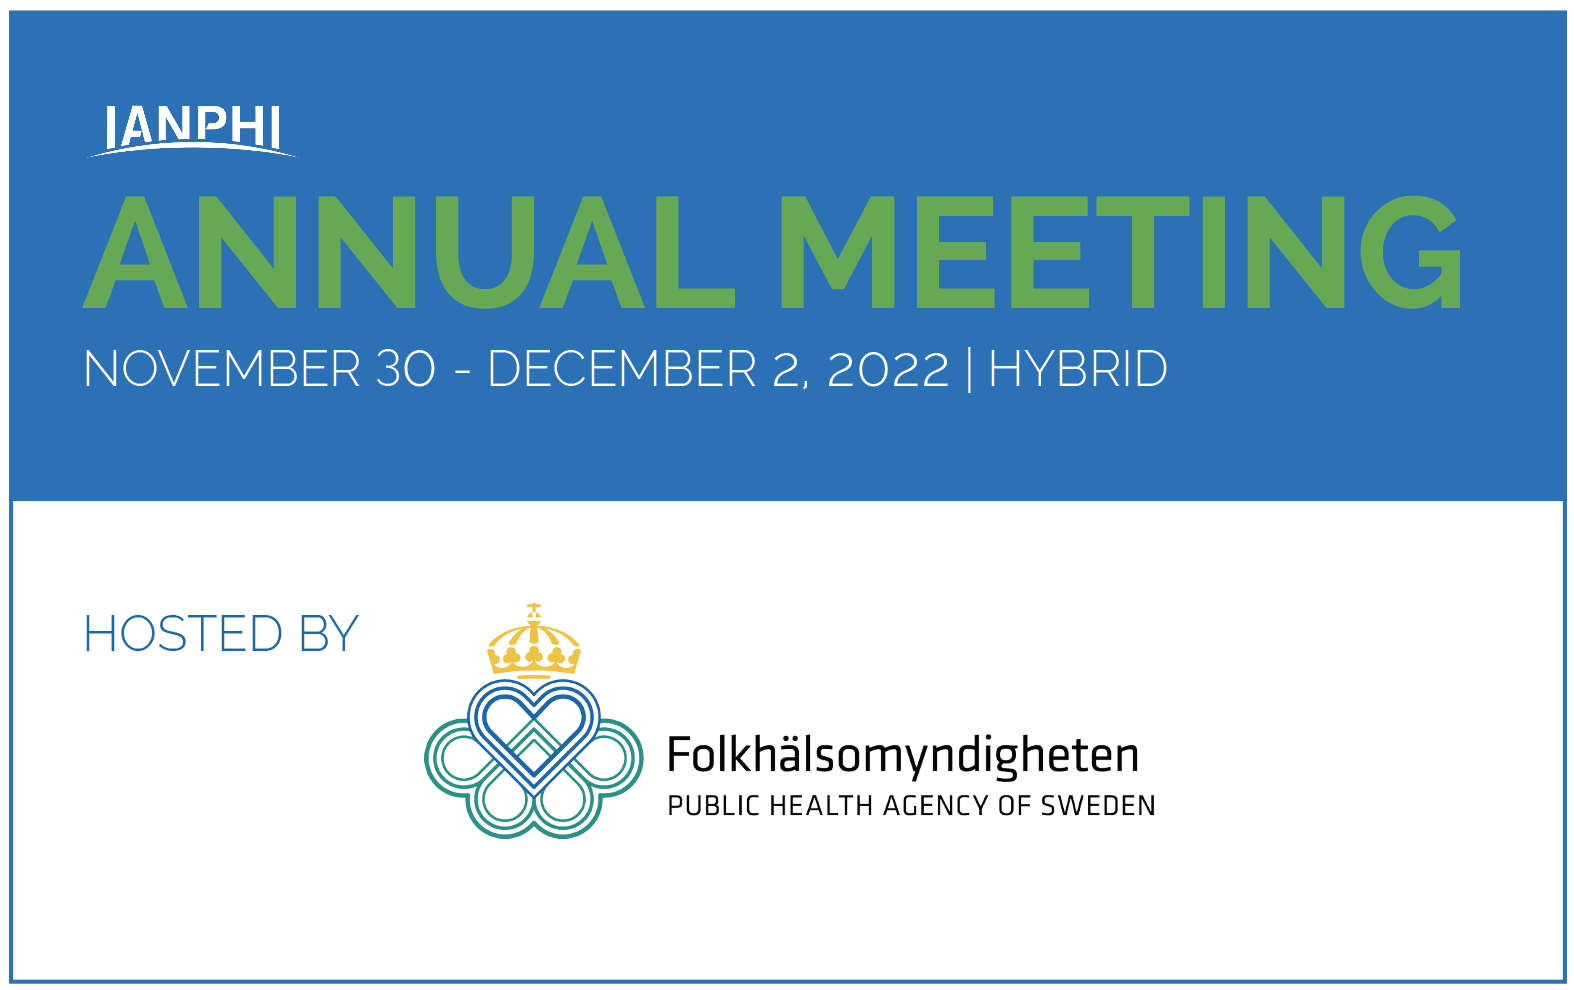 2022 IANPHI Annual Meeting hosted by the Public Health Agency of Sweden